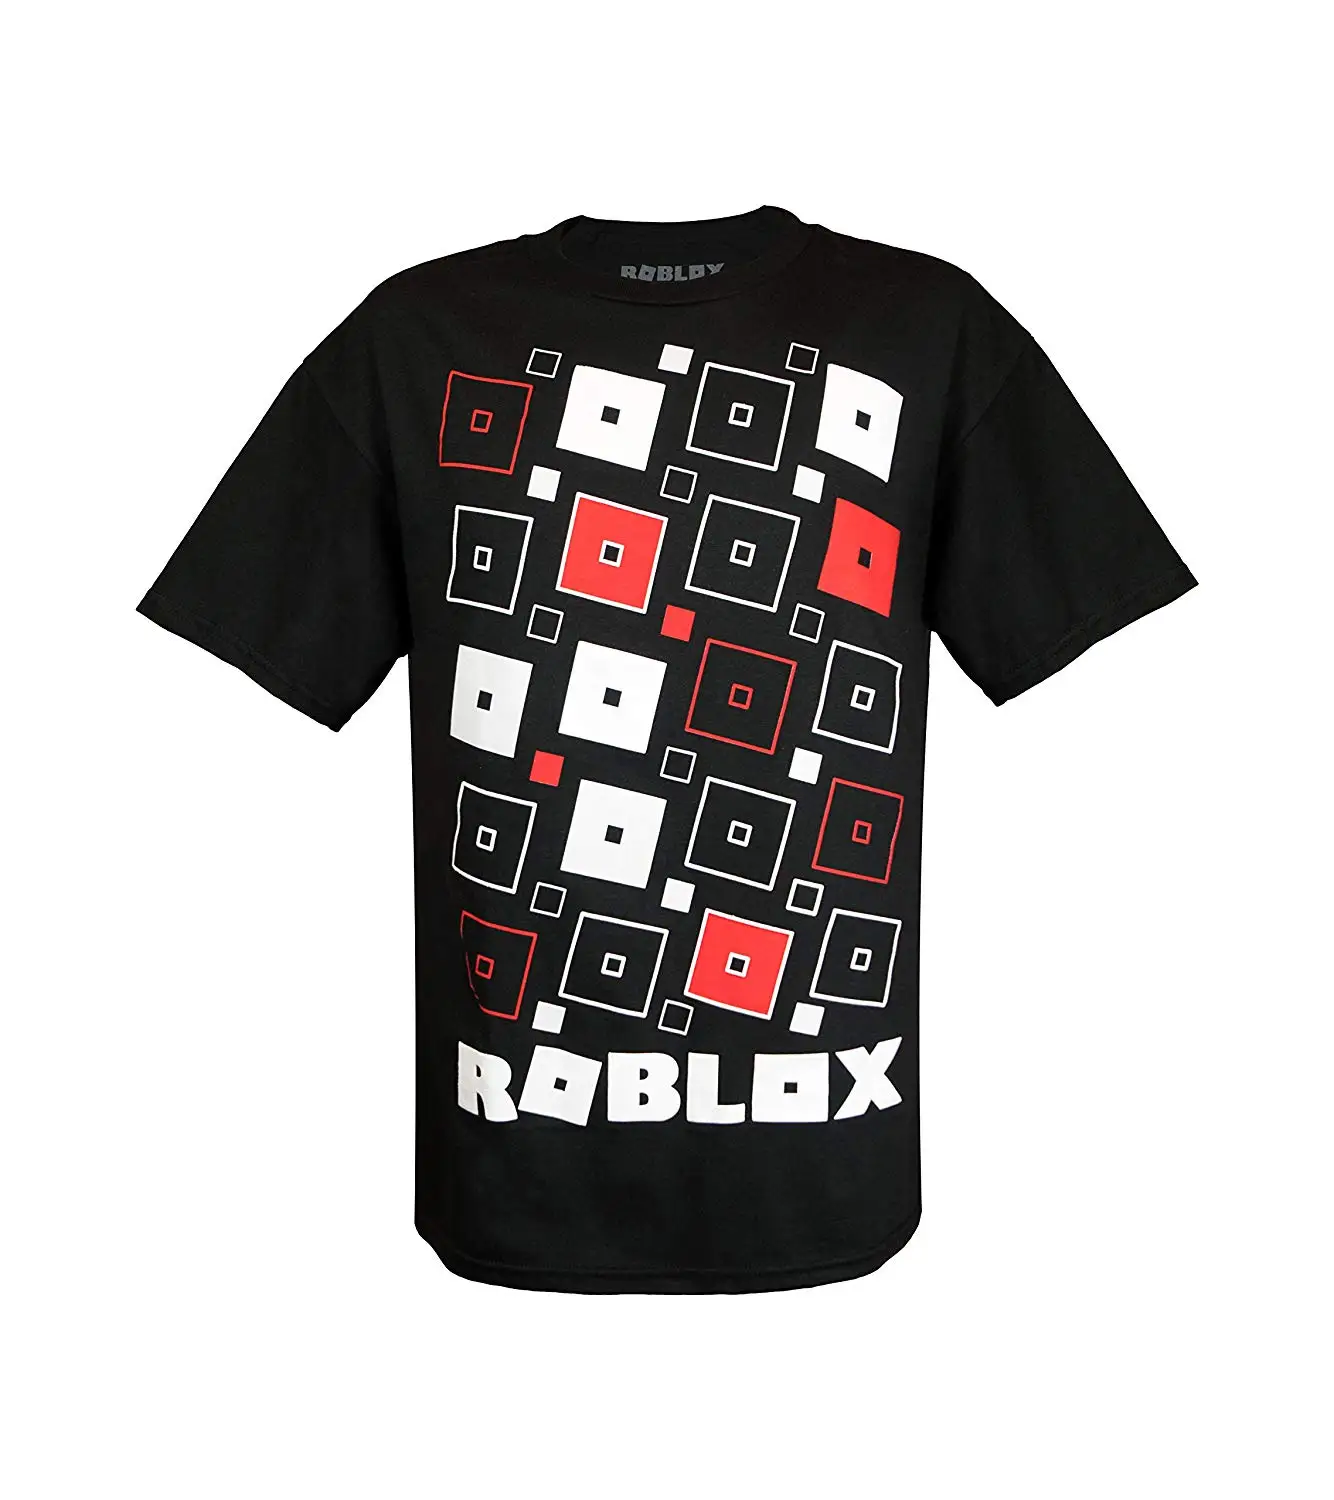 Buy Roblox Game Play With Builderman Character Glow In The Dark For Young Kids Boys And Girls Black Tshirt Tee Medium In Cheap Price On Alibaba Com - roblox game play with builder man character glow in the dark